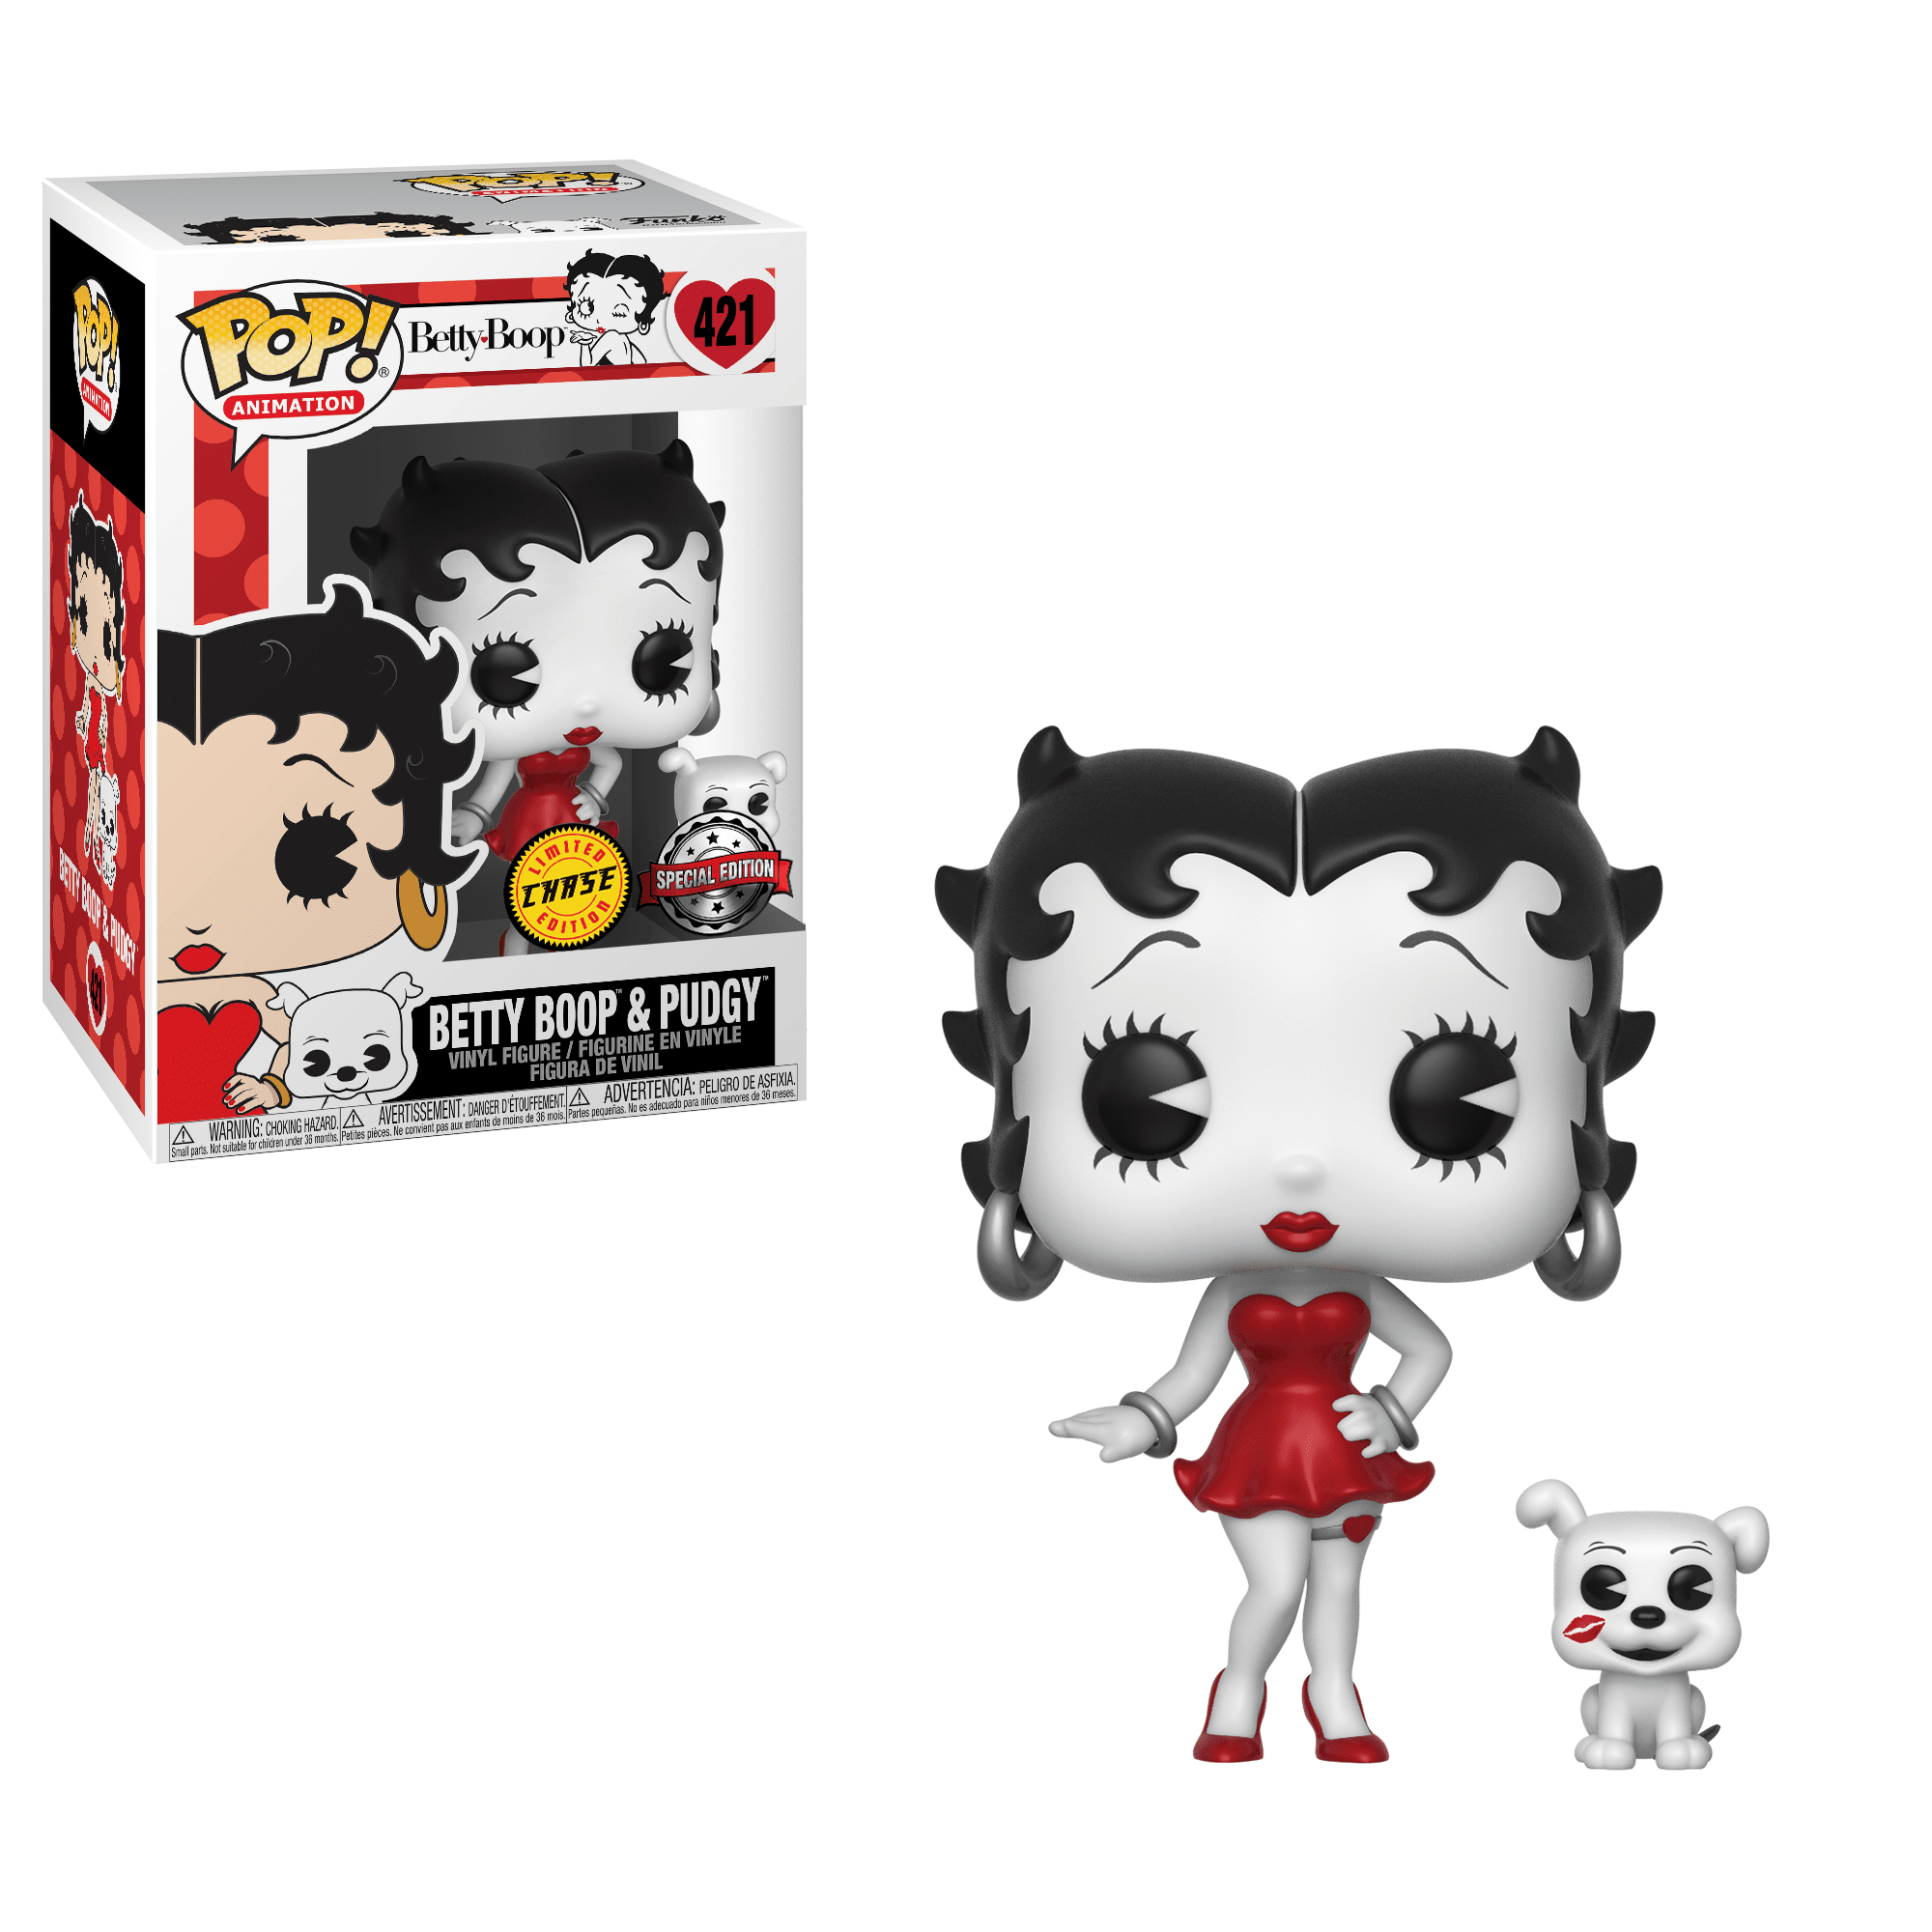 Funko Pop! Betty Boop (w/ Pudgy) (Black and White